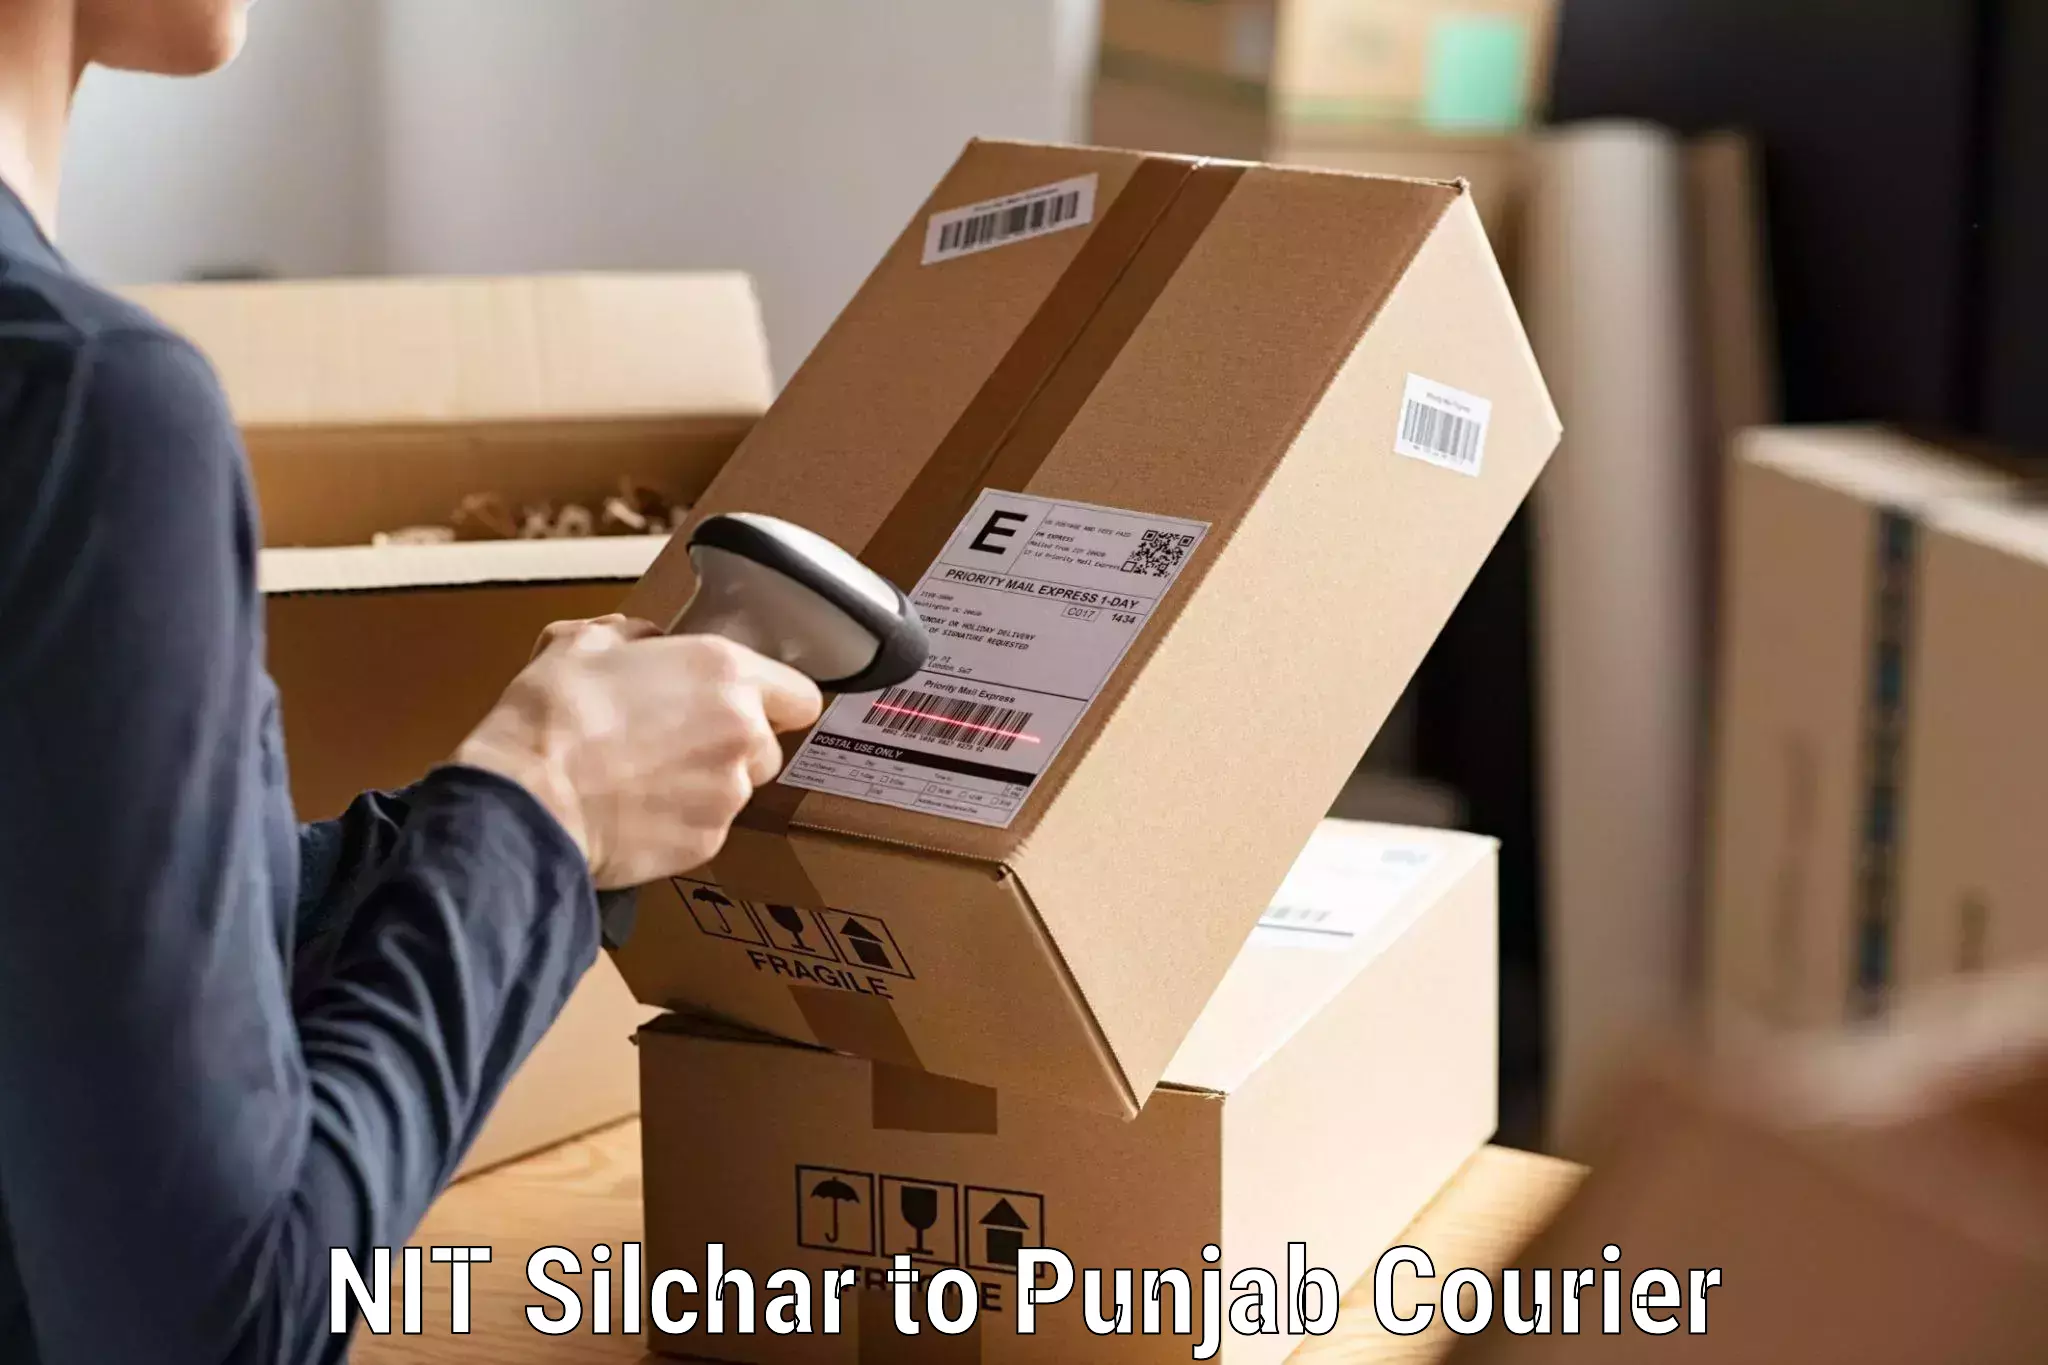 Residential courier service NIT Silchar to Punjab